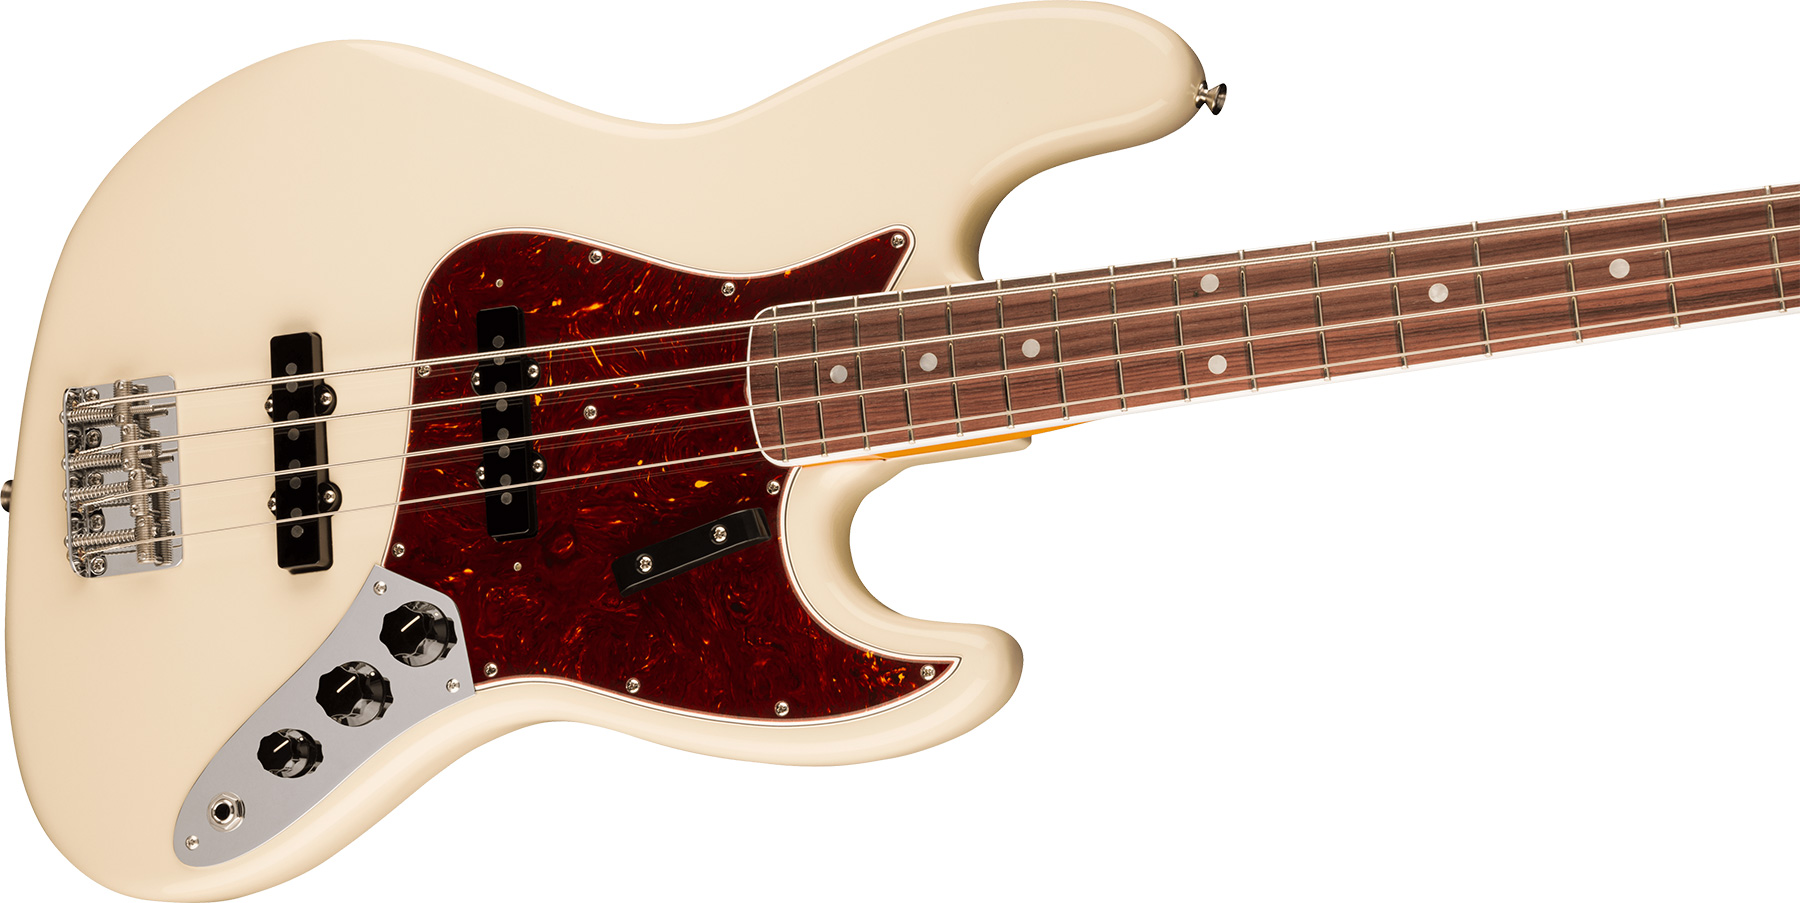 Fender Jazz Bass 1966 American Vintage Ii Usa Rw - Olympic White - Basse Électrique Solid Body - Variation 2